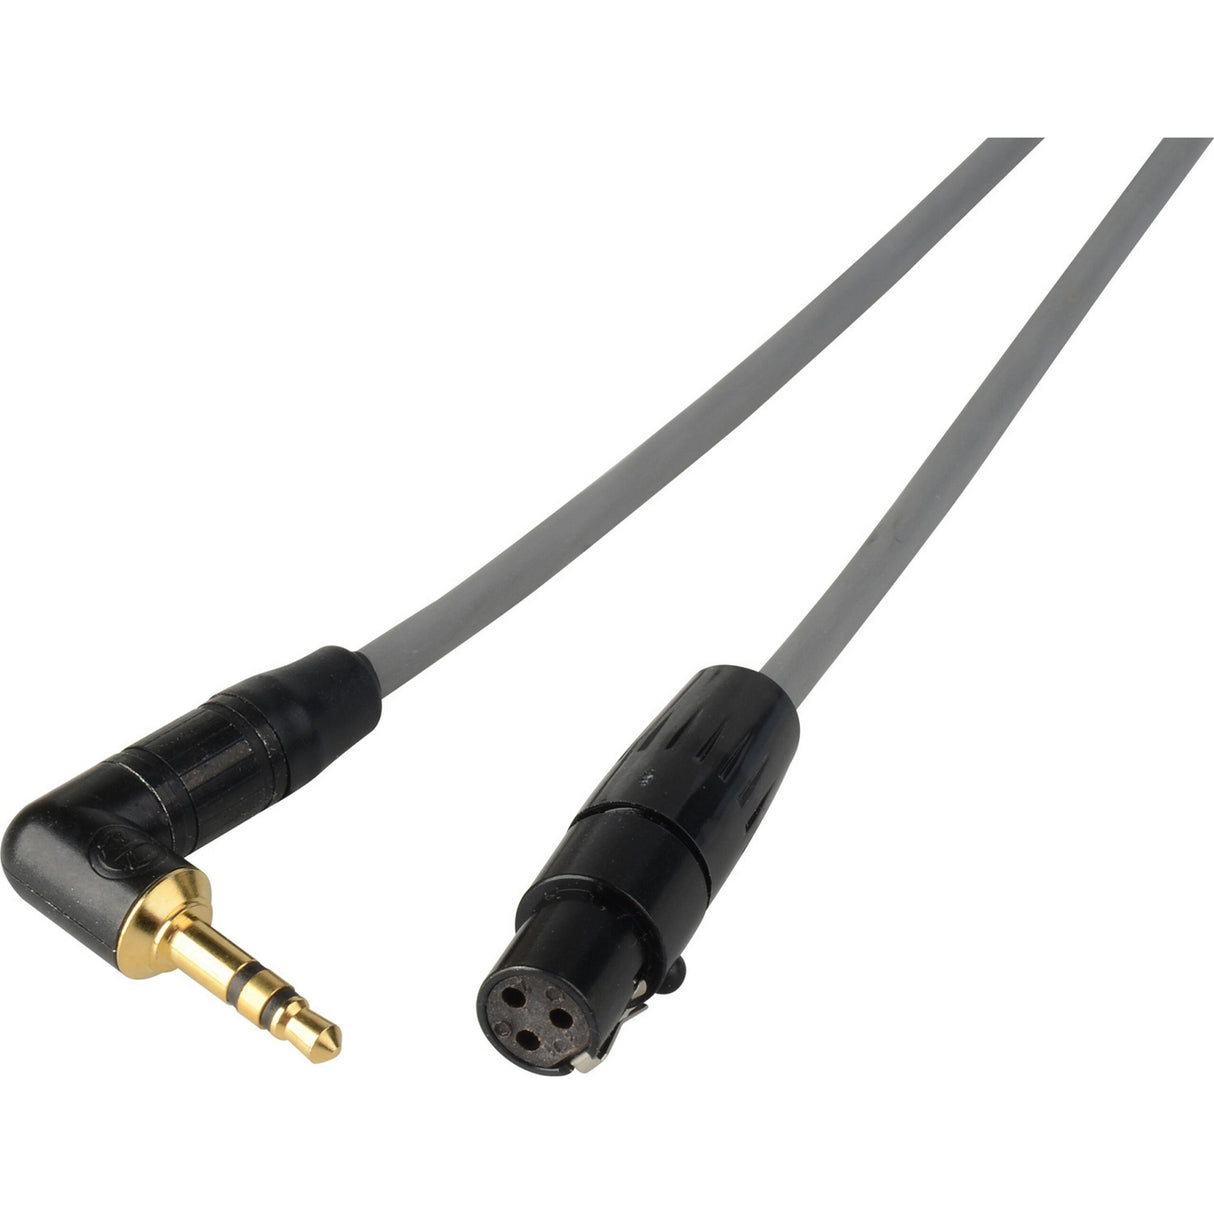 Laird SD-AUD5-01 Sound Devices Right Angle 3.5mm Plug to 3-Pin Mini-XLR TA3F Link Cable, 1 Foot